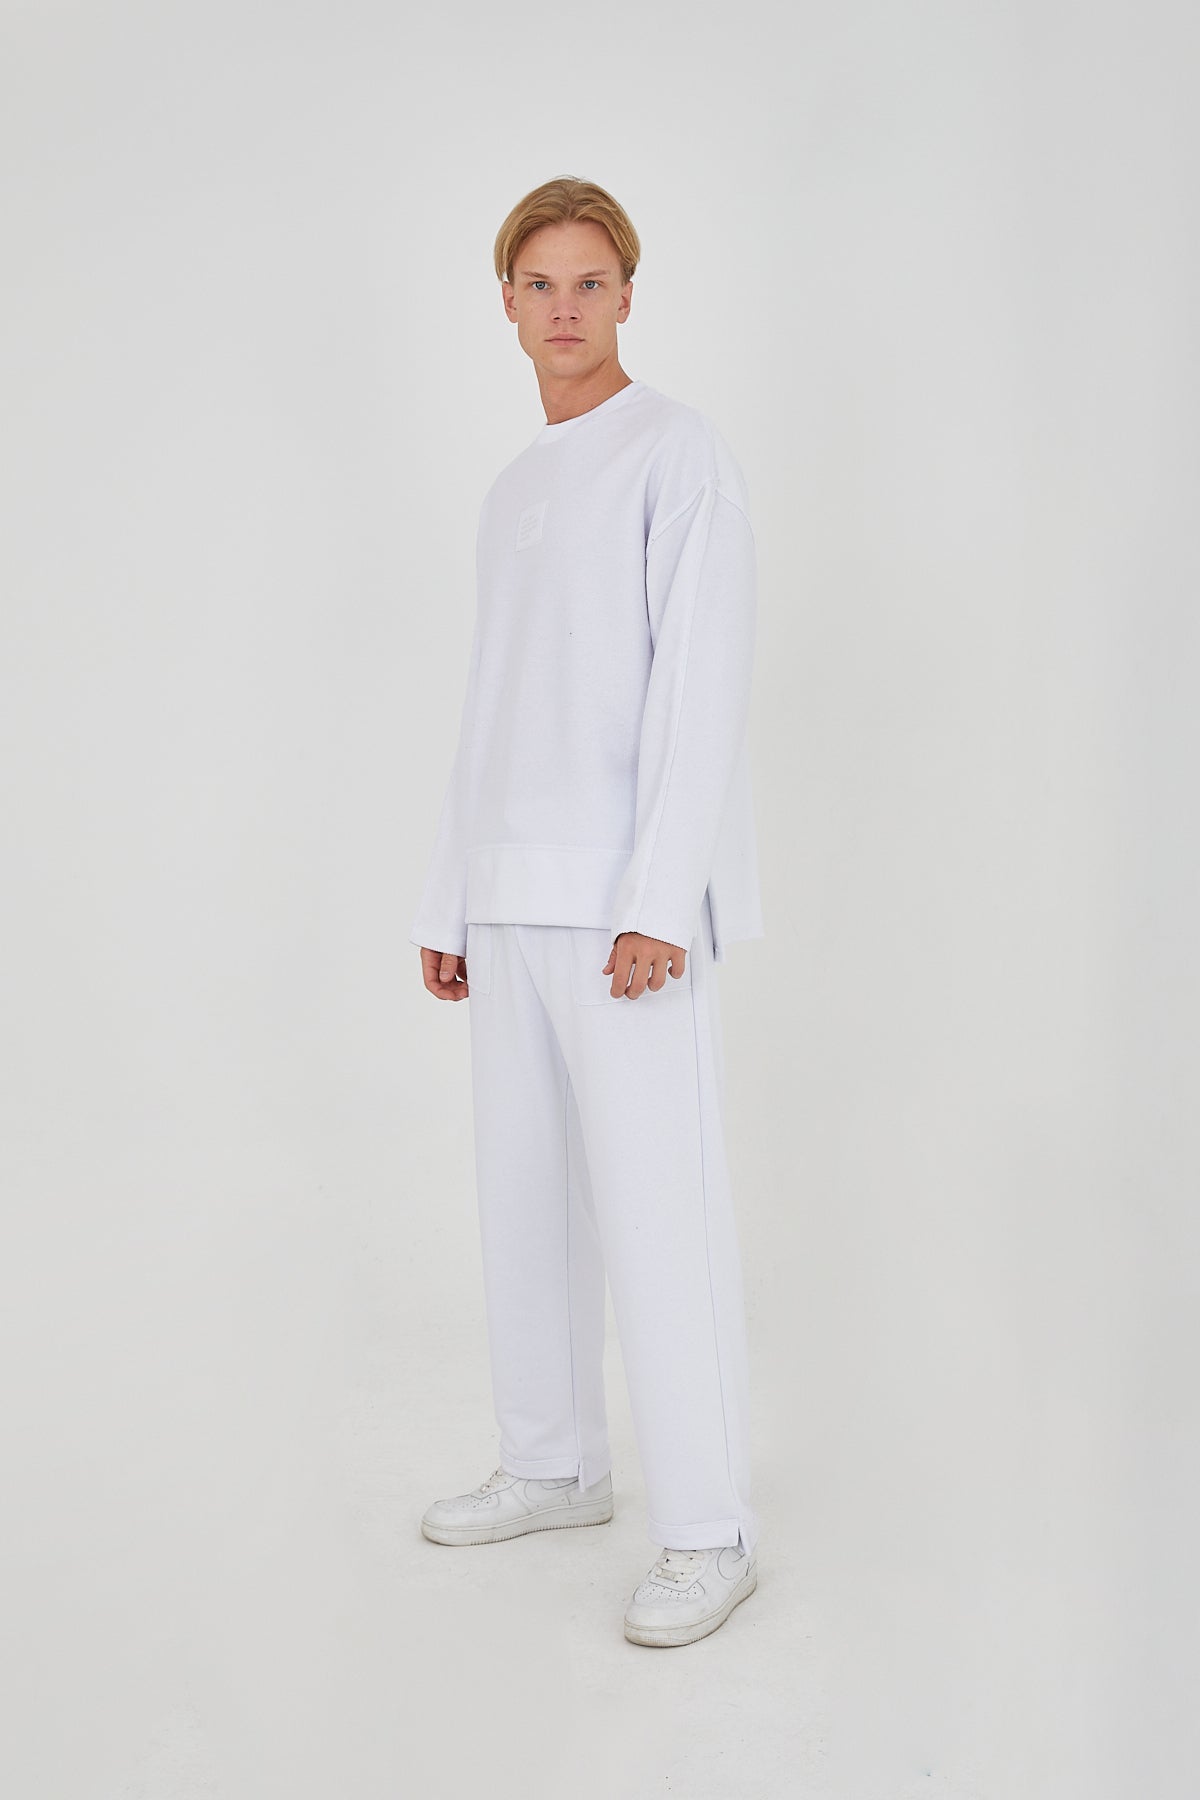 TRACKSUIT - THE PERFECT OUTFIT - WHITE